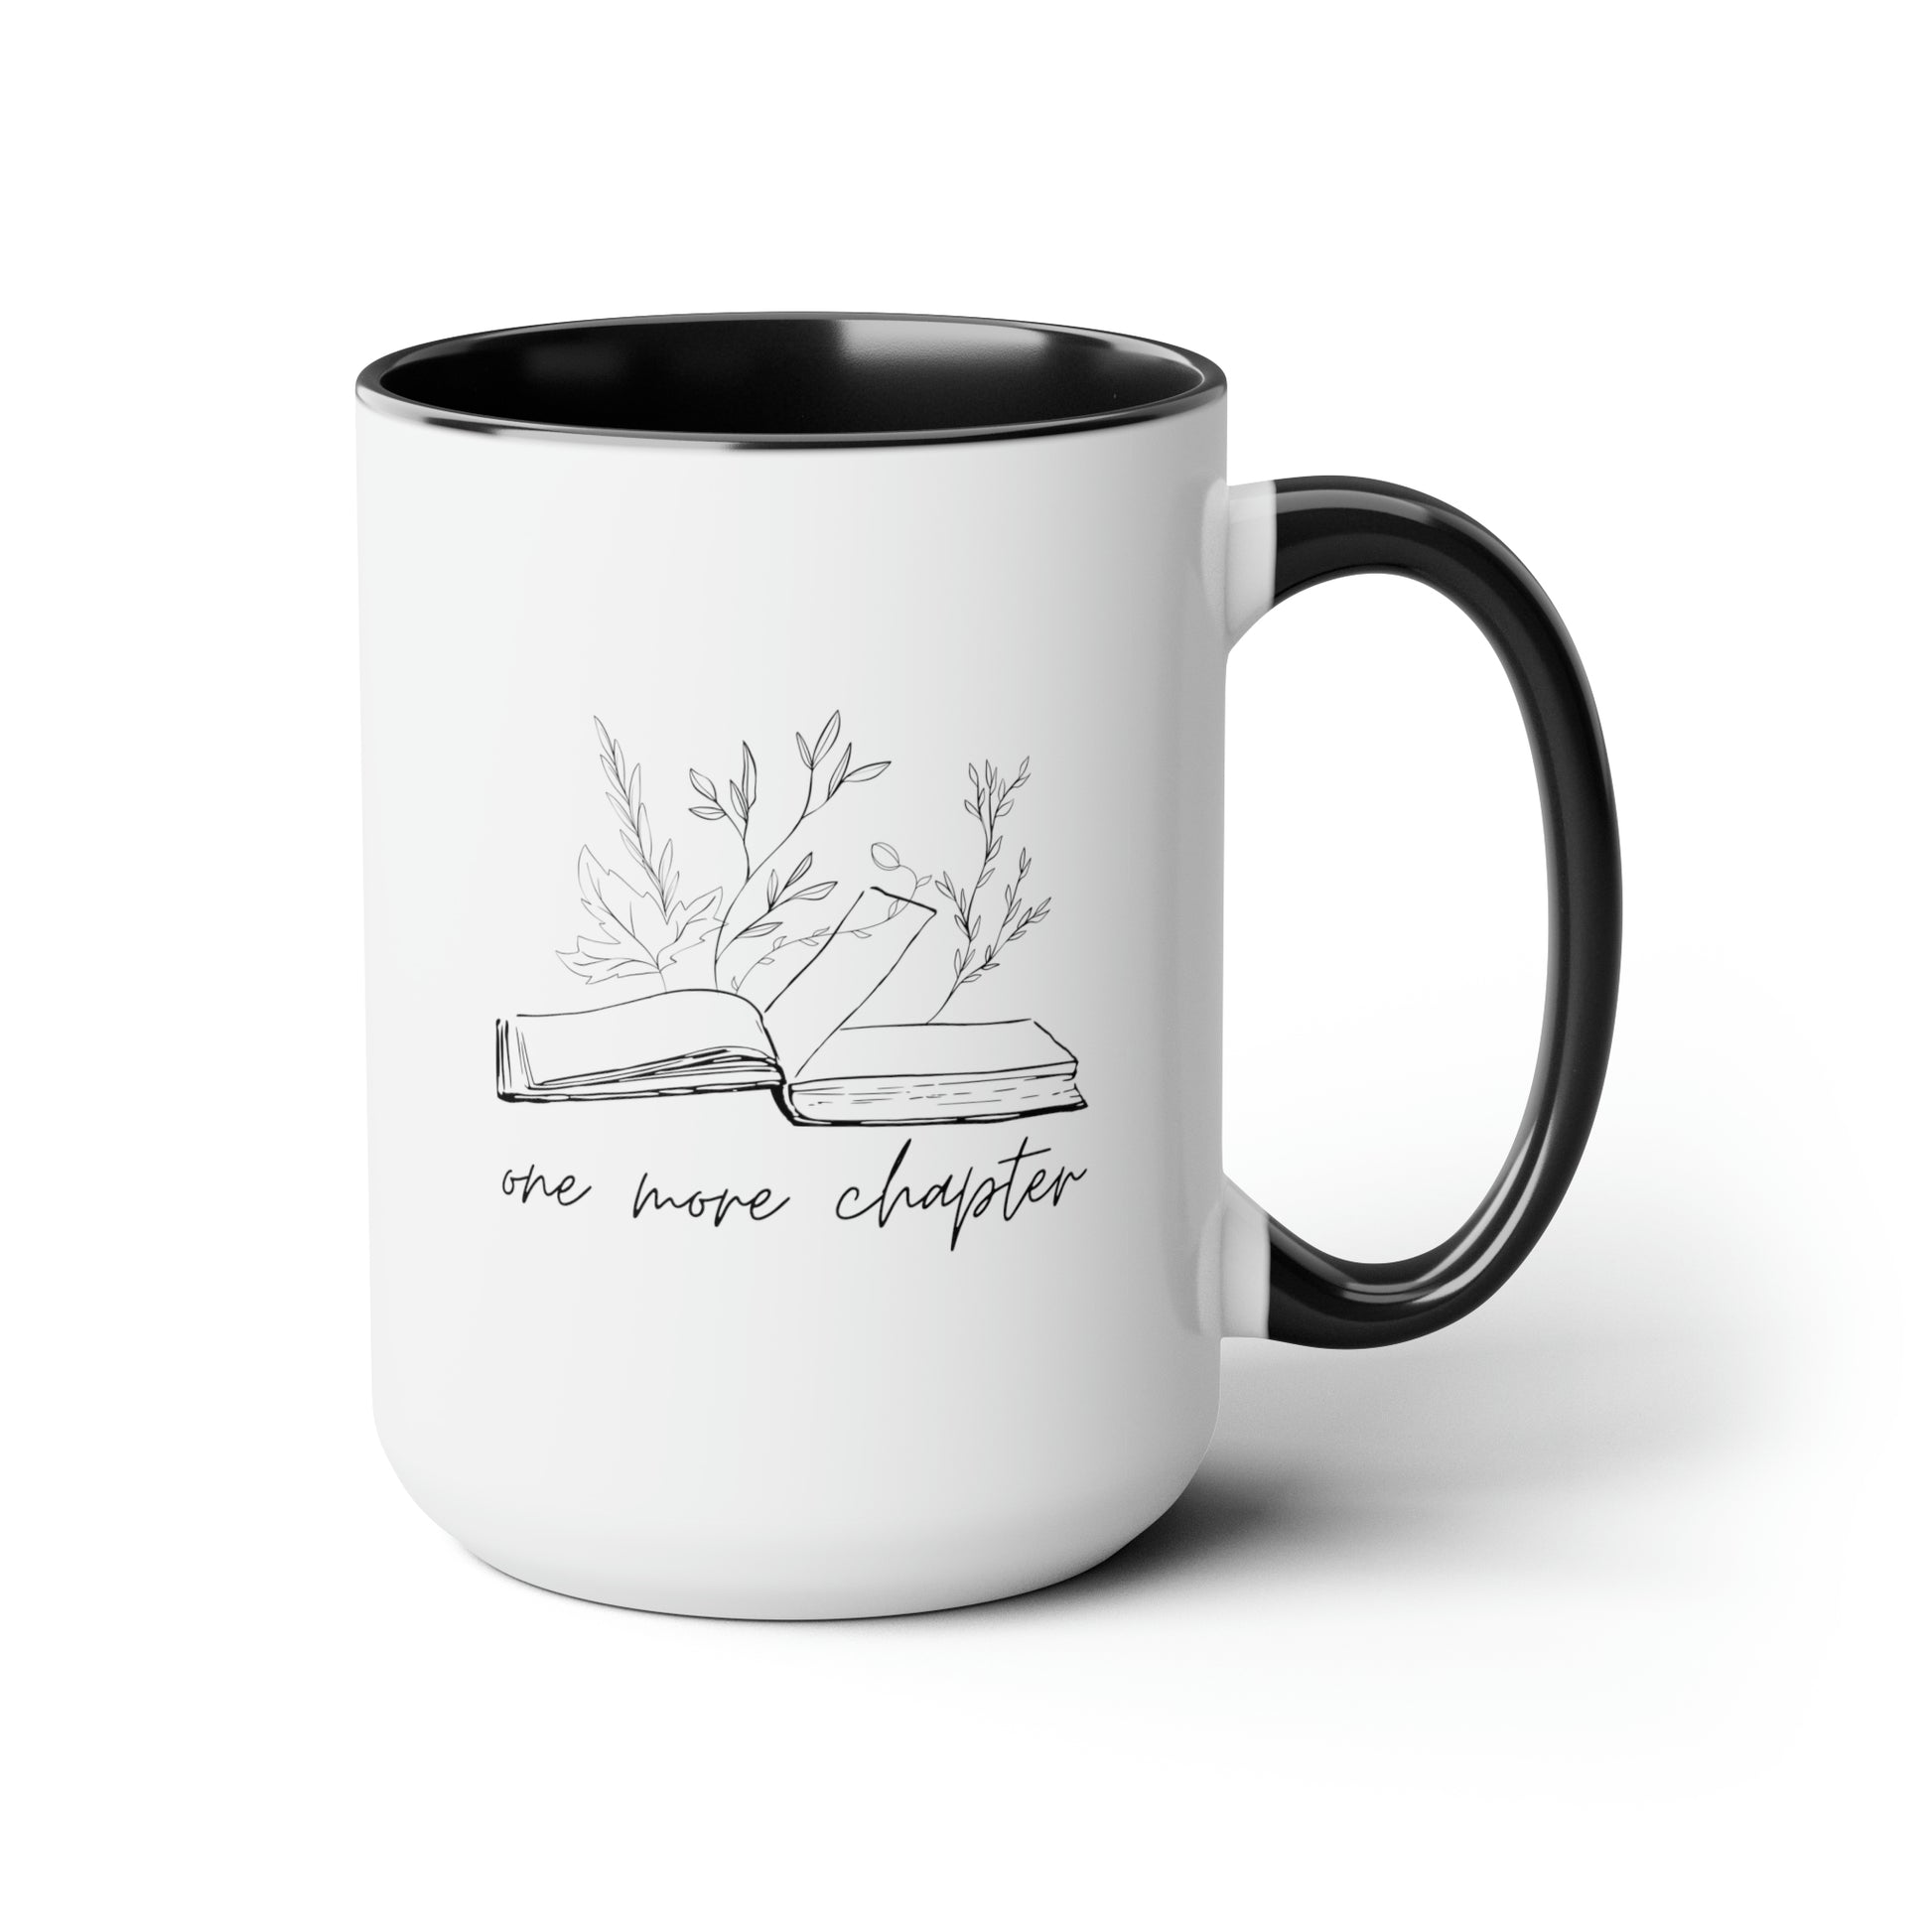 One More Chapter 15oz white with black accent funny large coffee mug gift for bookworm reading trending now women librarian book lover teacher nerd waveywares wavey wares wavywares wavy wares